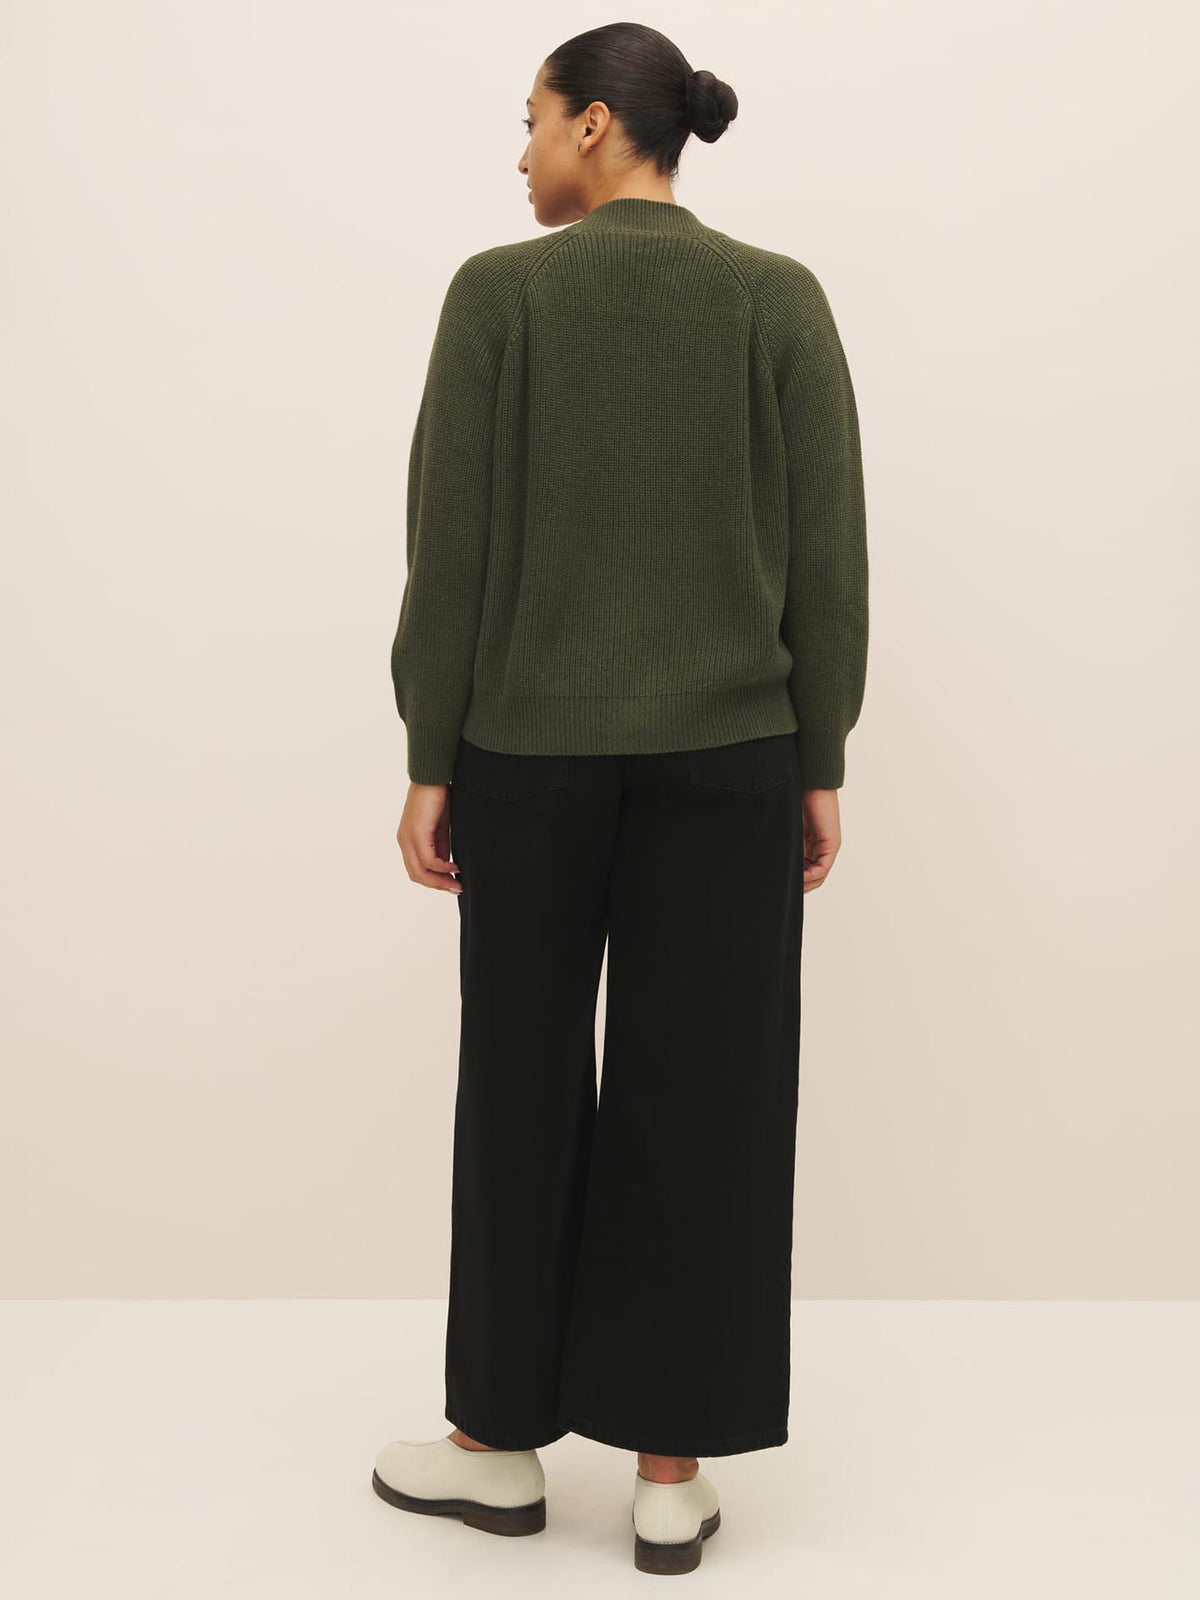 A person wearing a Hannes Cardigan in Khaki Marle from Kowtow and black pants standing with their back to the camera.